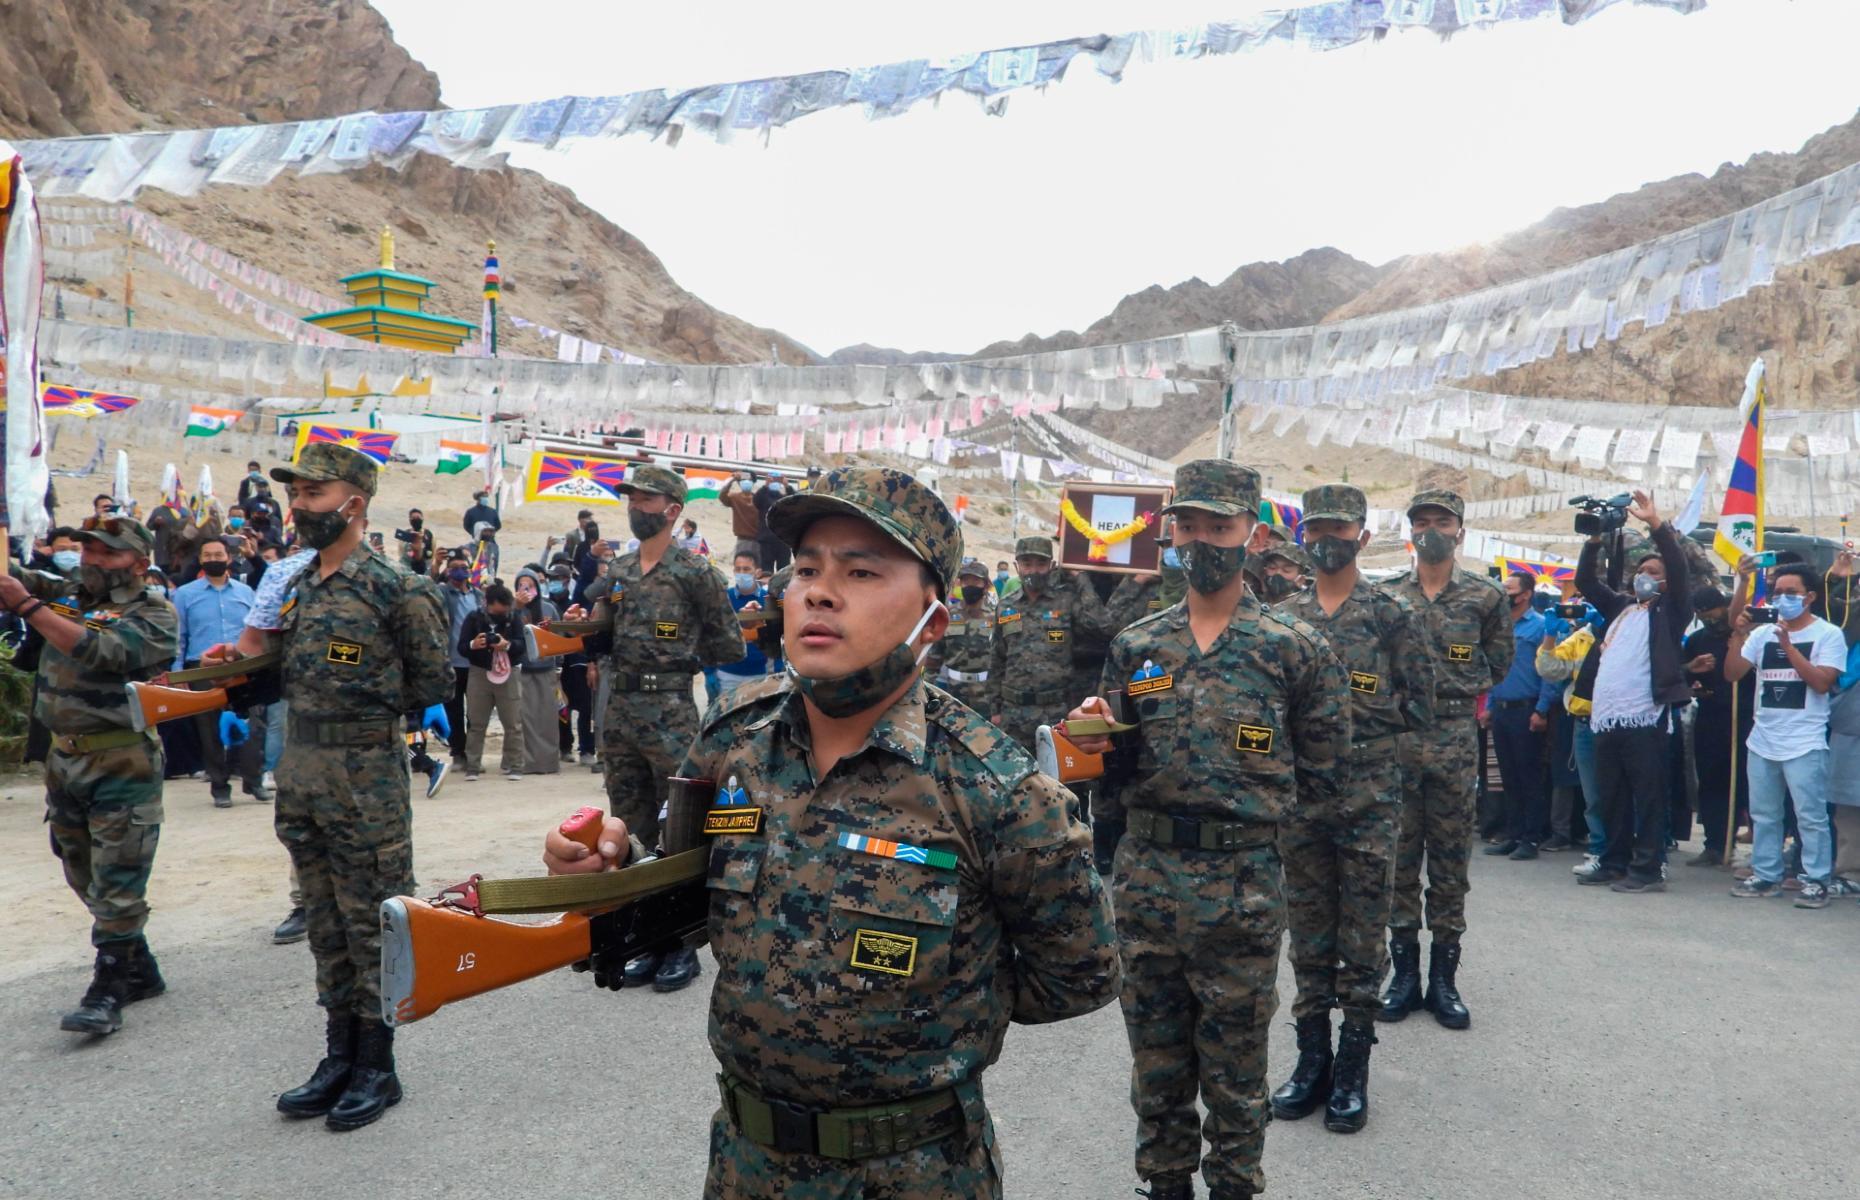 <p>The <a href="https://www.bbc.co.uk/news/world-asia-53062484">2,100-mile (3,440km)-long border</a> between China and India which rests in the Himalayas has been the subject of an ongoing dispute. Since the 1950s, the two countries have fought over where the boundary should lie, with a war breaking out in 1952. Despite an agreement in 1996, which forbade use of explosives and firearms at the boundary, tensions reignited in January 2020 and a fatal clash took place in the Galwan Valley that June. <a href="https://www.nytimes.com/2021/01/25/world/asia/india-china-border.html">A “minor face-off” occurred in January 2021</a>, according to the Indian Army, although officials from both sides gave away few details about it.</p>